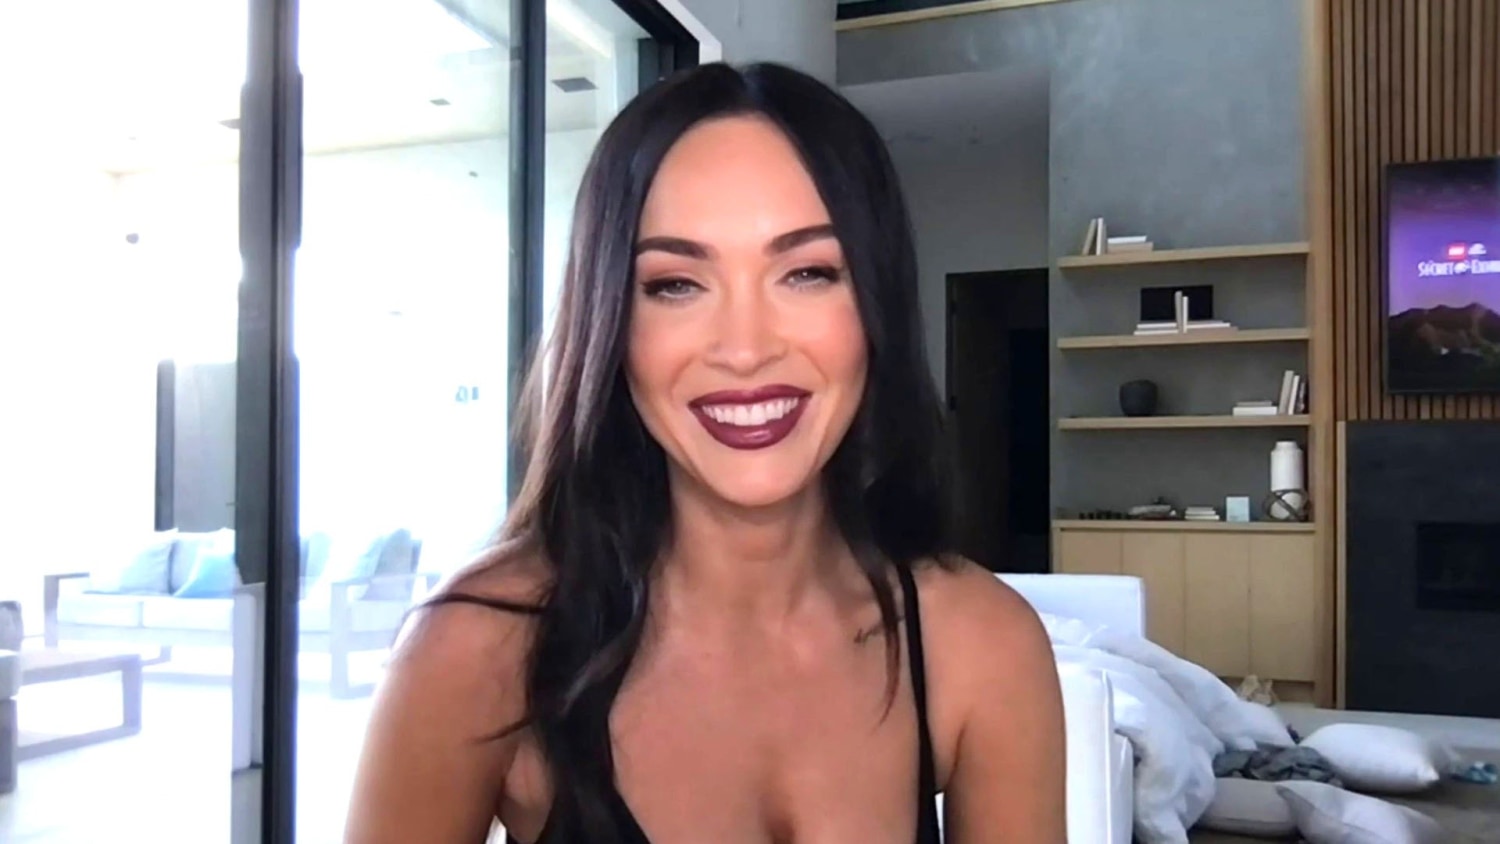 Megan Fox Opens Up About Body Dysmorphia While Covering Sports Illustrated